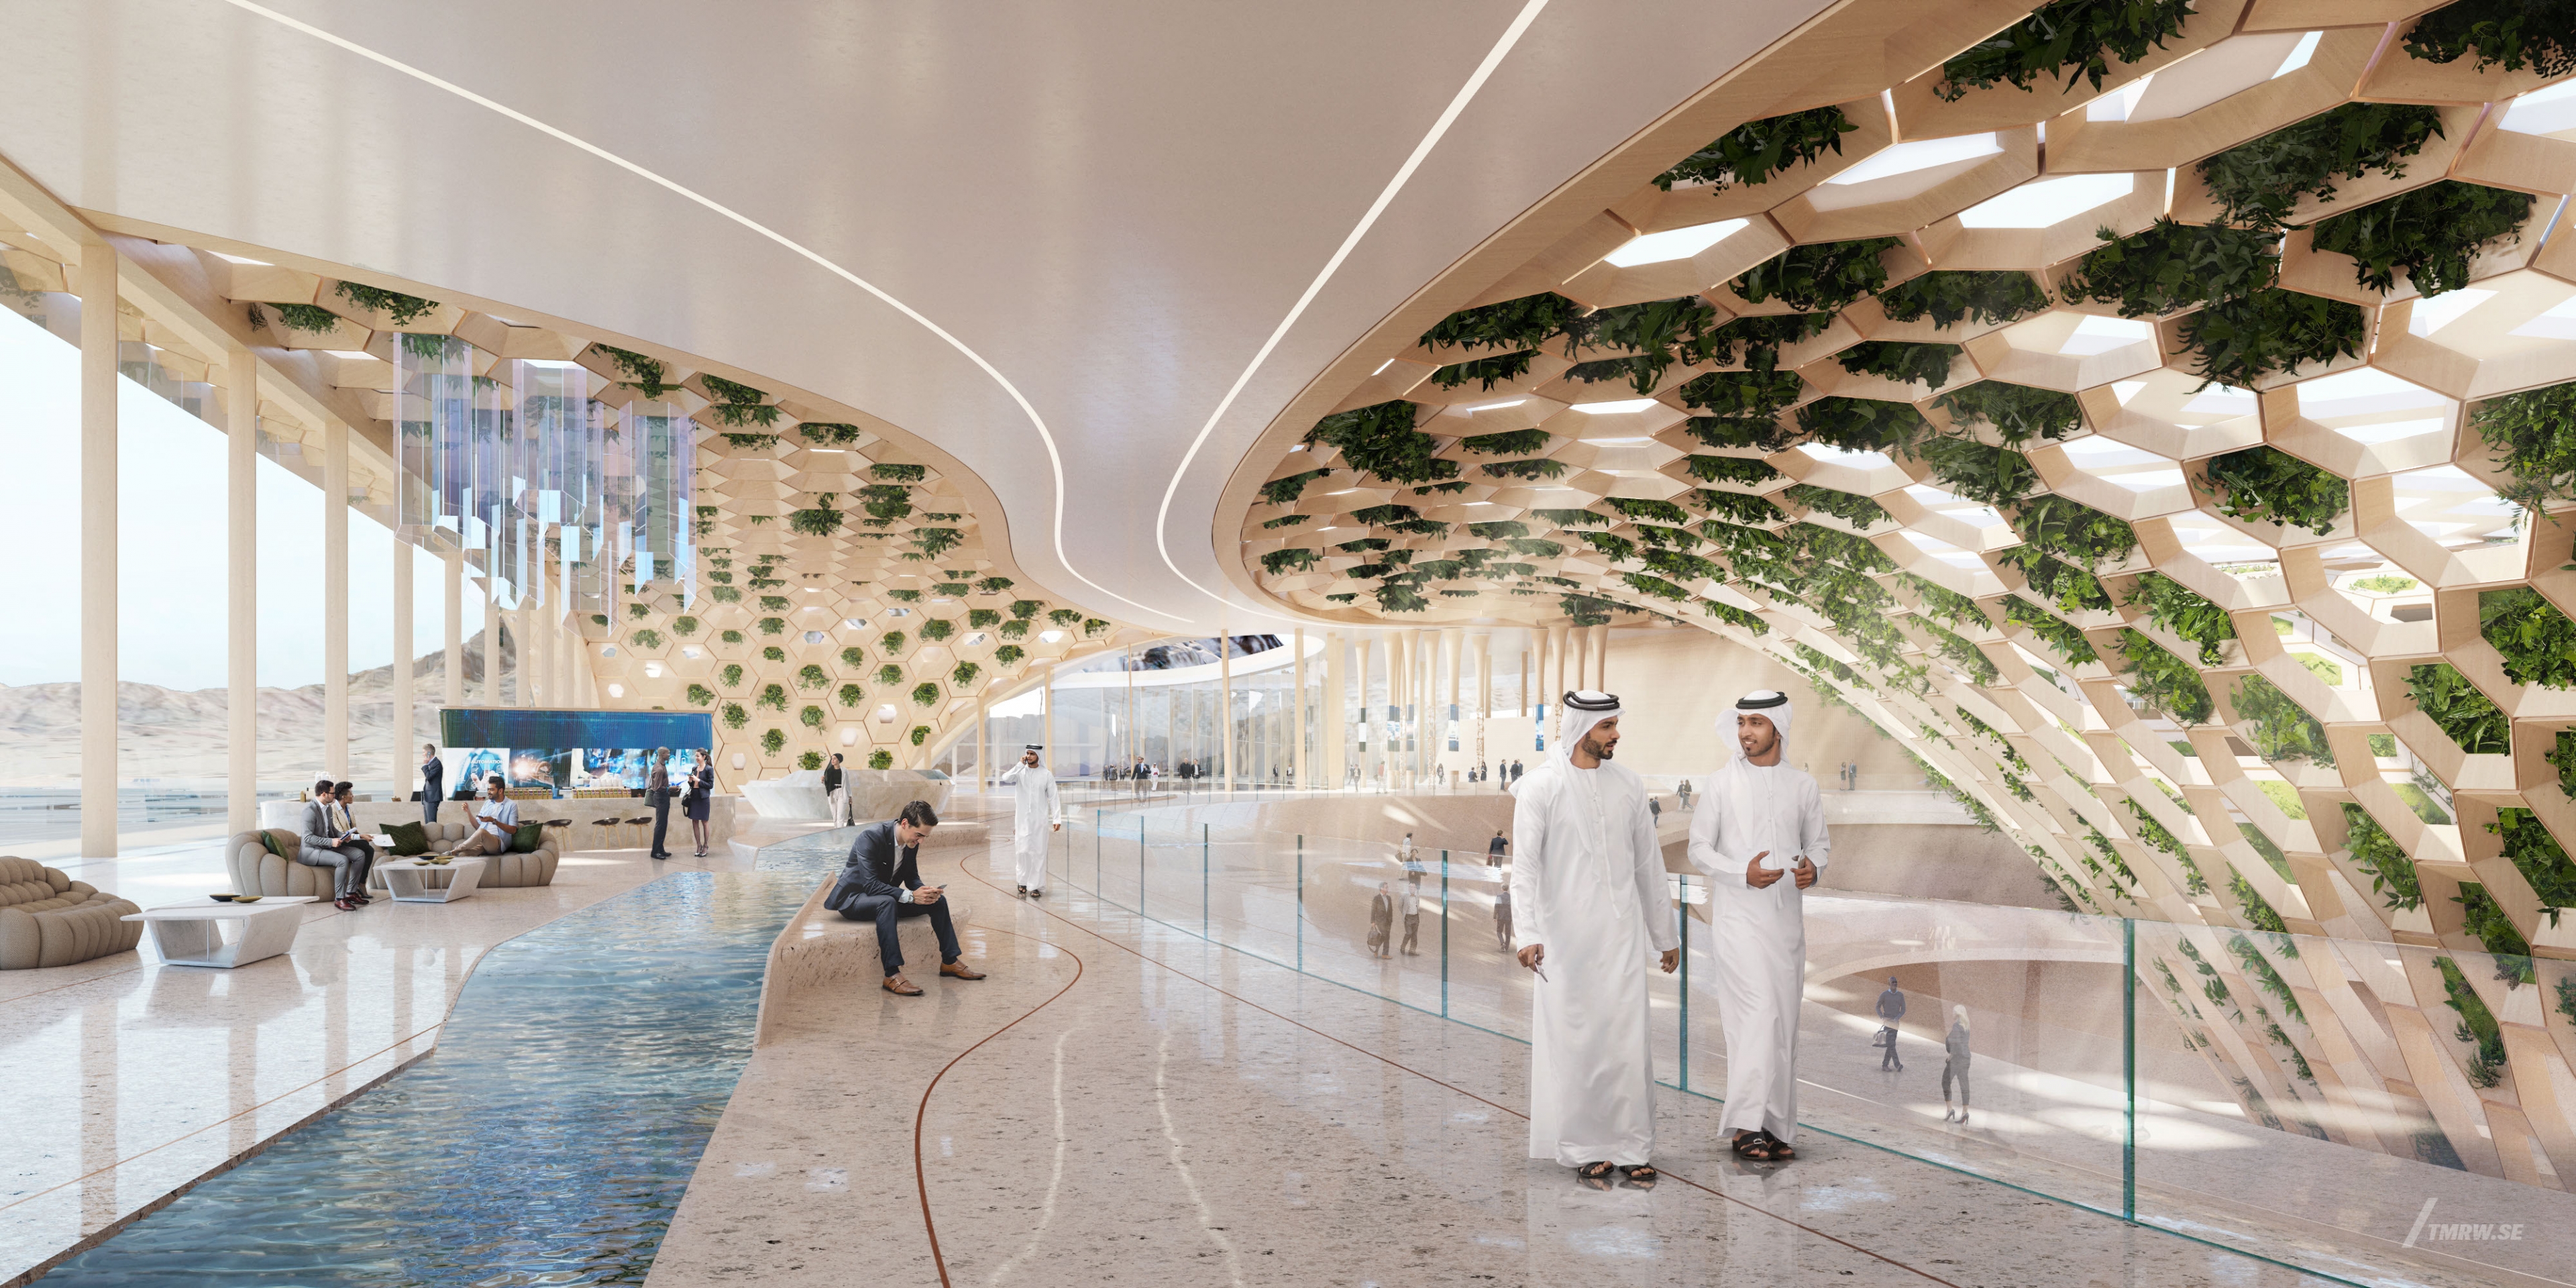 Architectural visualization of NEOM for Foster + Partners. An image of the interior of a office lougne with people walking around in daylight from street view.